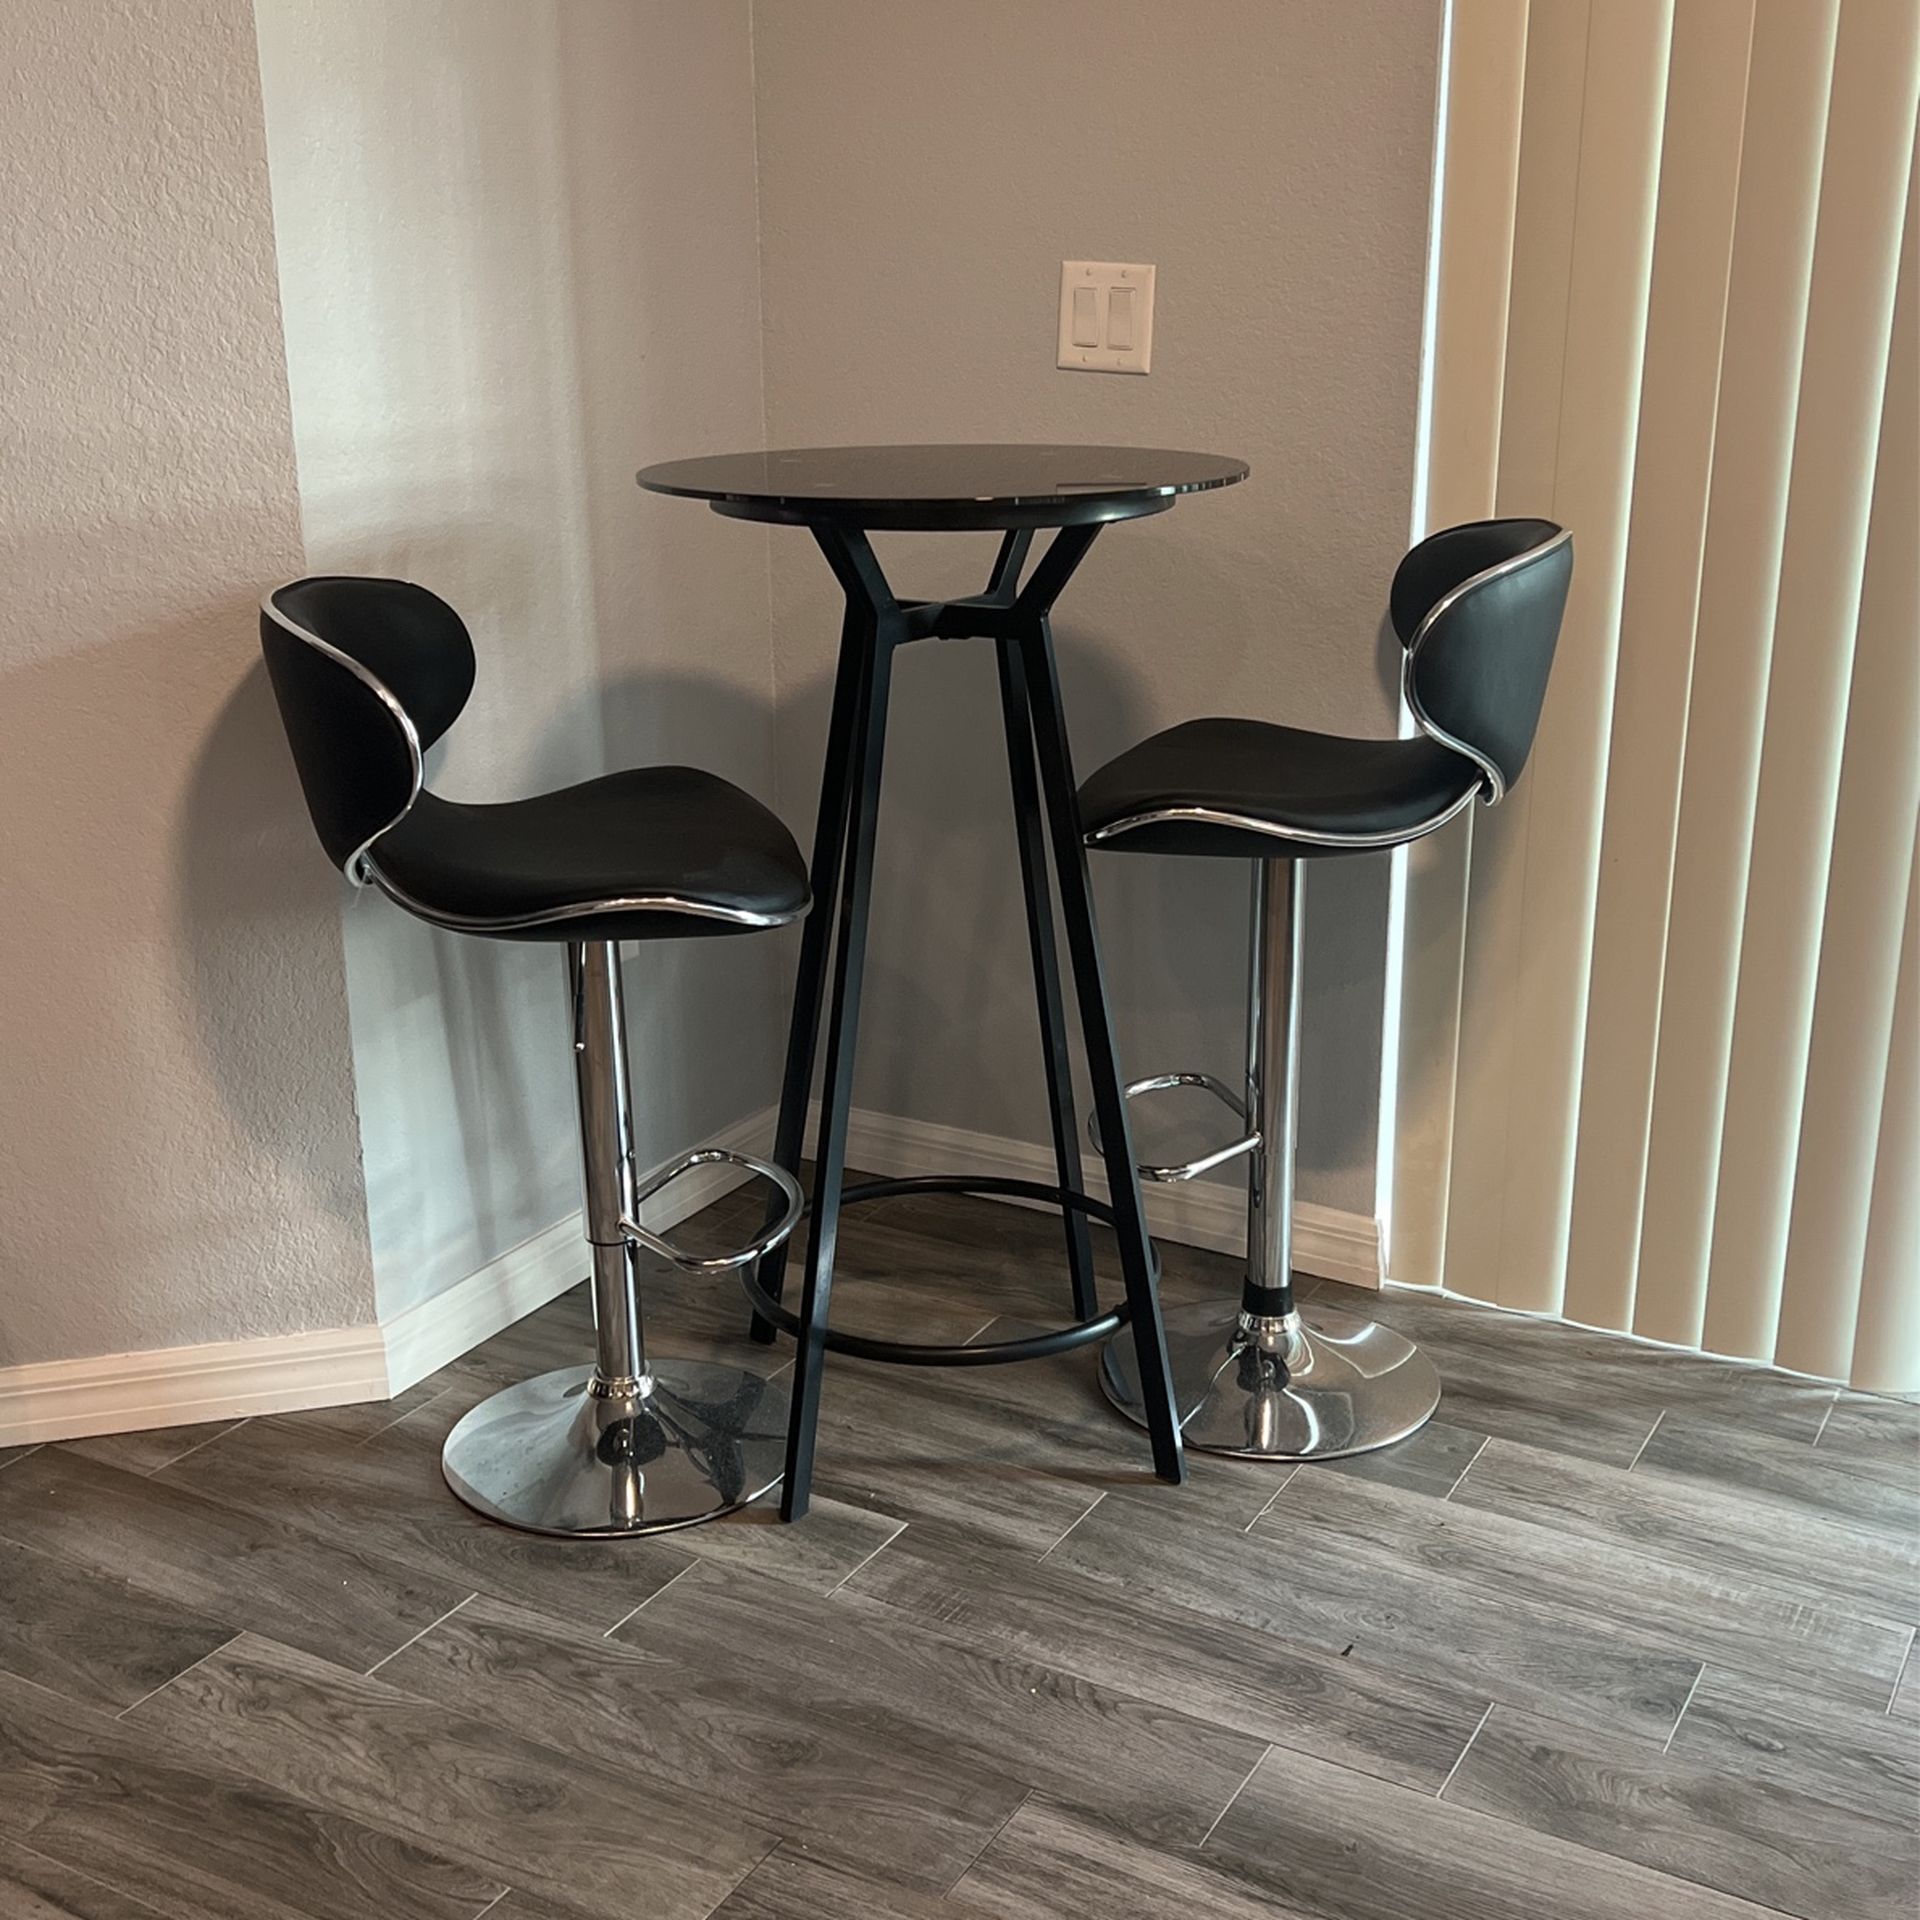 Breakfast Nook Stool Height Table With Stools Included